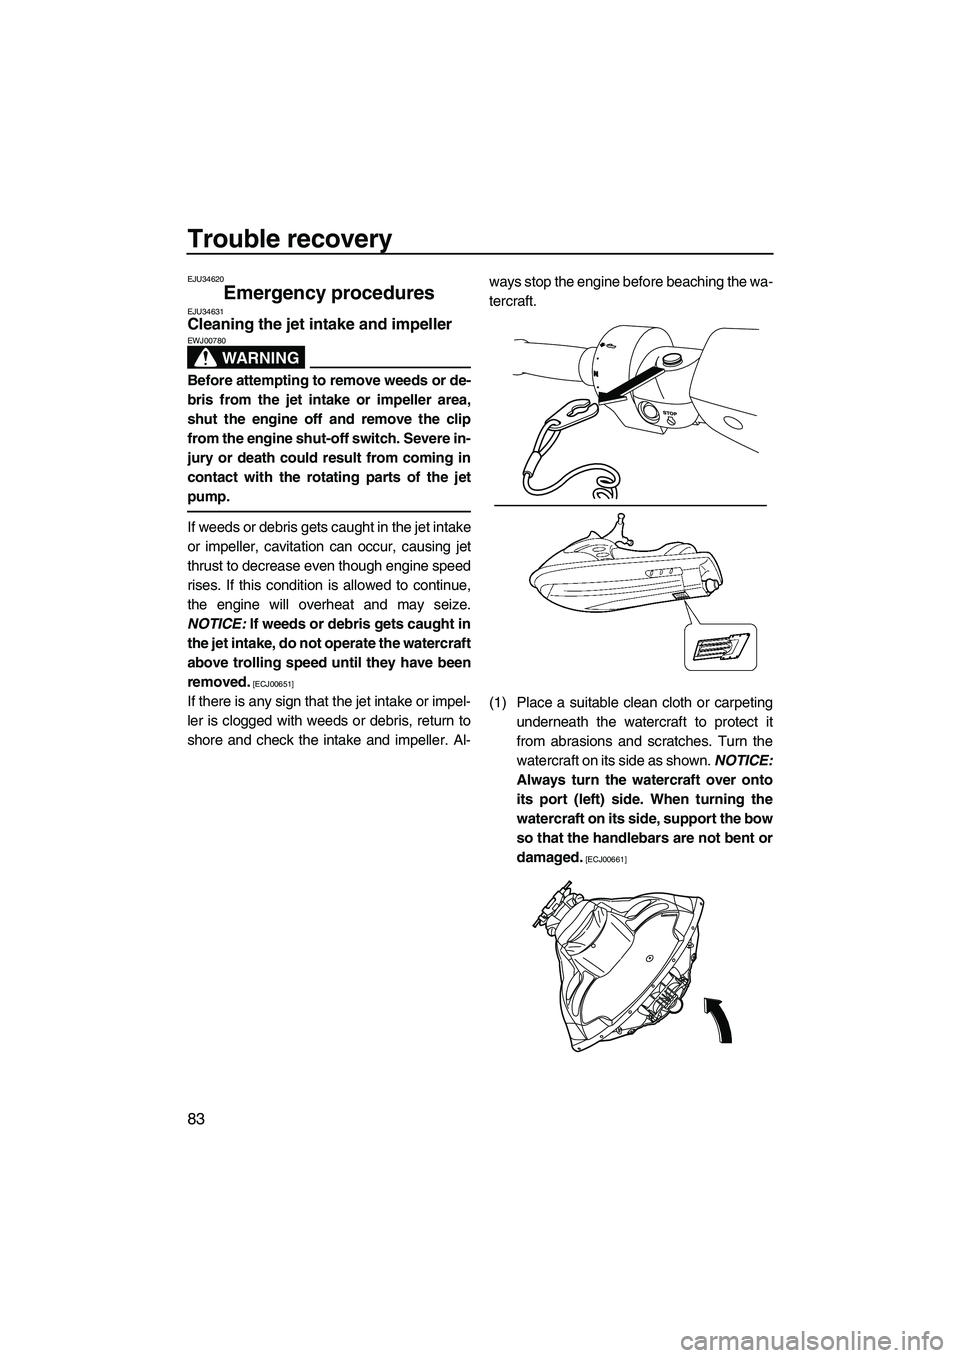 YAMAHA FZR 2009  Owners Manual Trouble recovery
83
EJU34620
Emergency procedures EJU34631Cleaning the jet intake and impeller 
WARNING
EWJ00780
Before attempting to remove weeds or de-
bris from the jet intake or impeller area,
shu